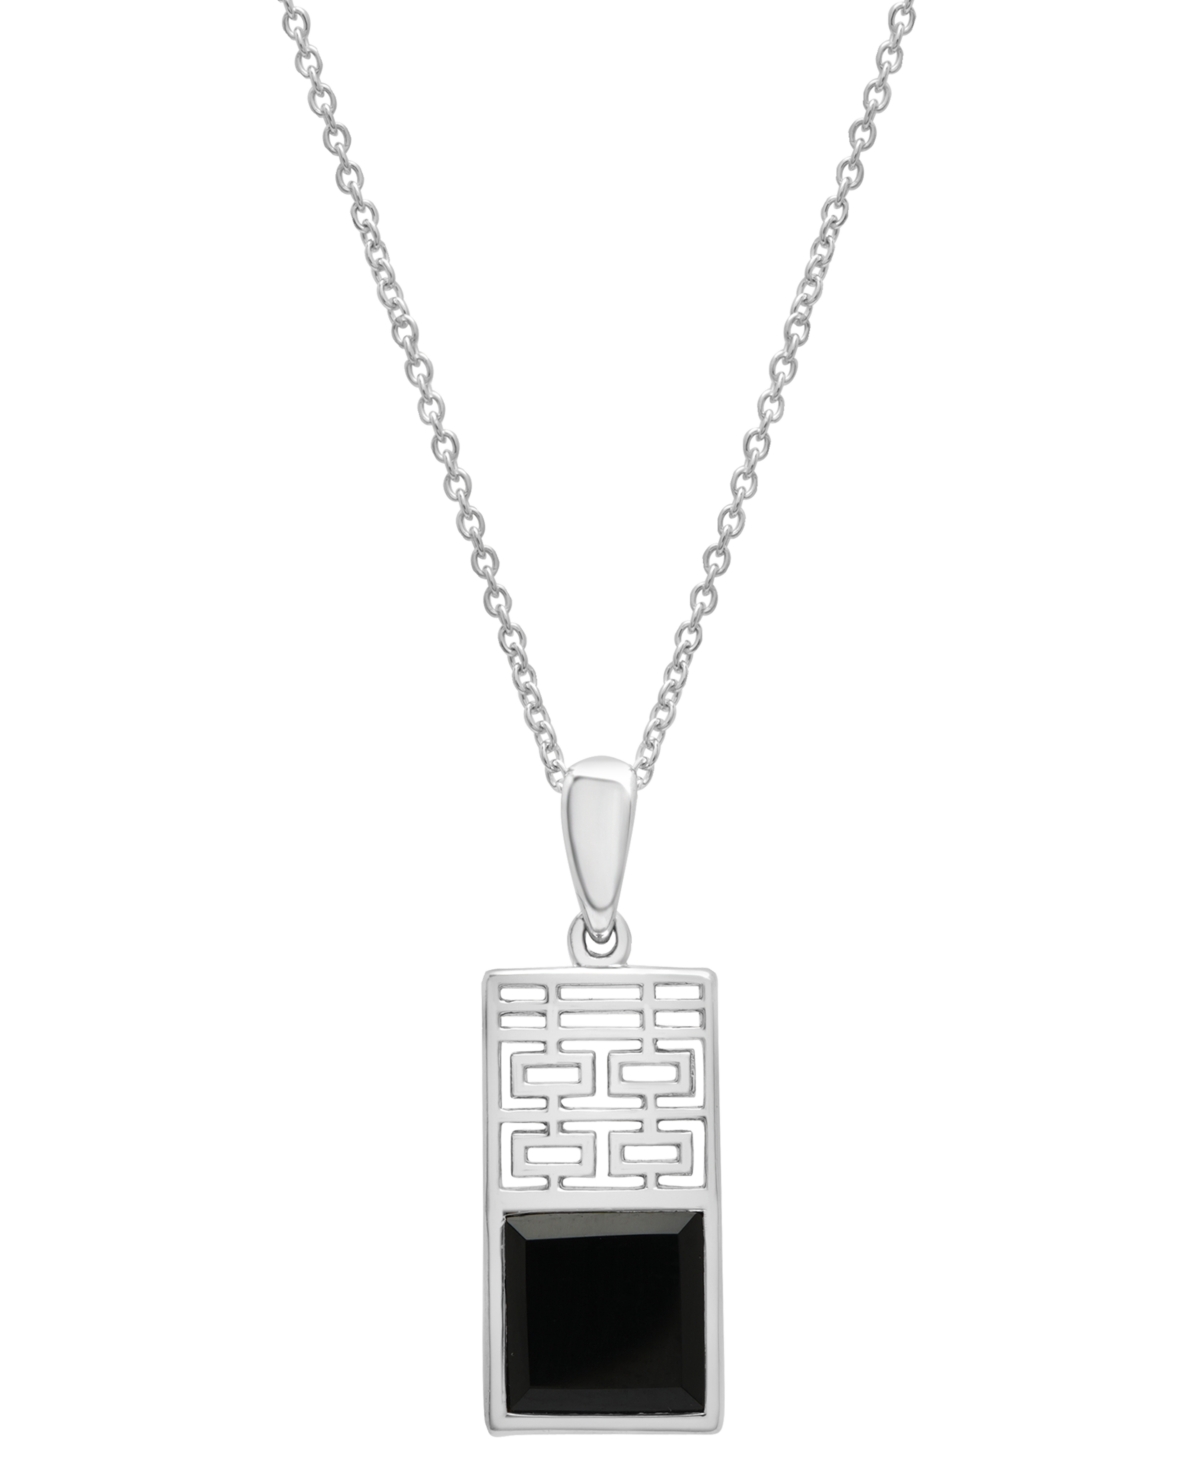 Onyx Happiness Dog Tag 18" Pendant Necklace in Sterling Silver - Onyx